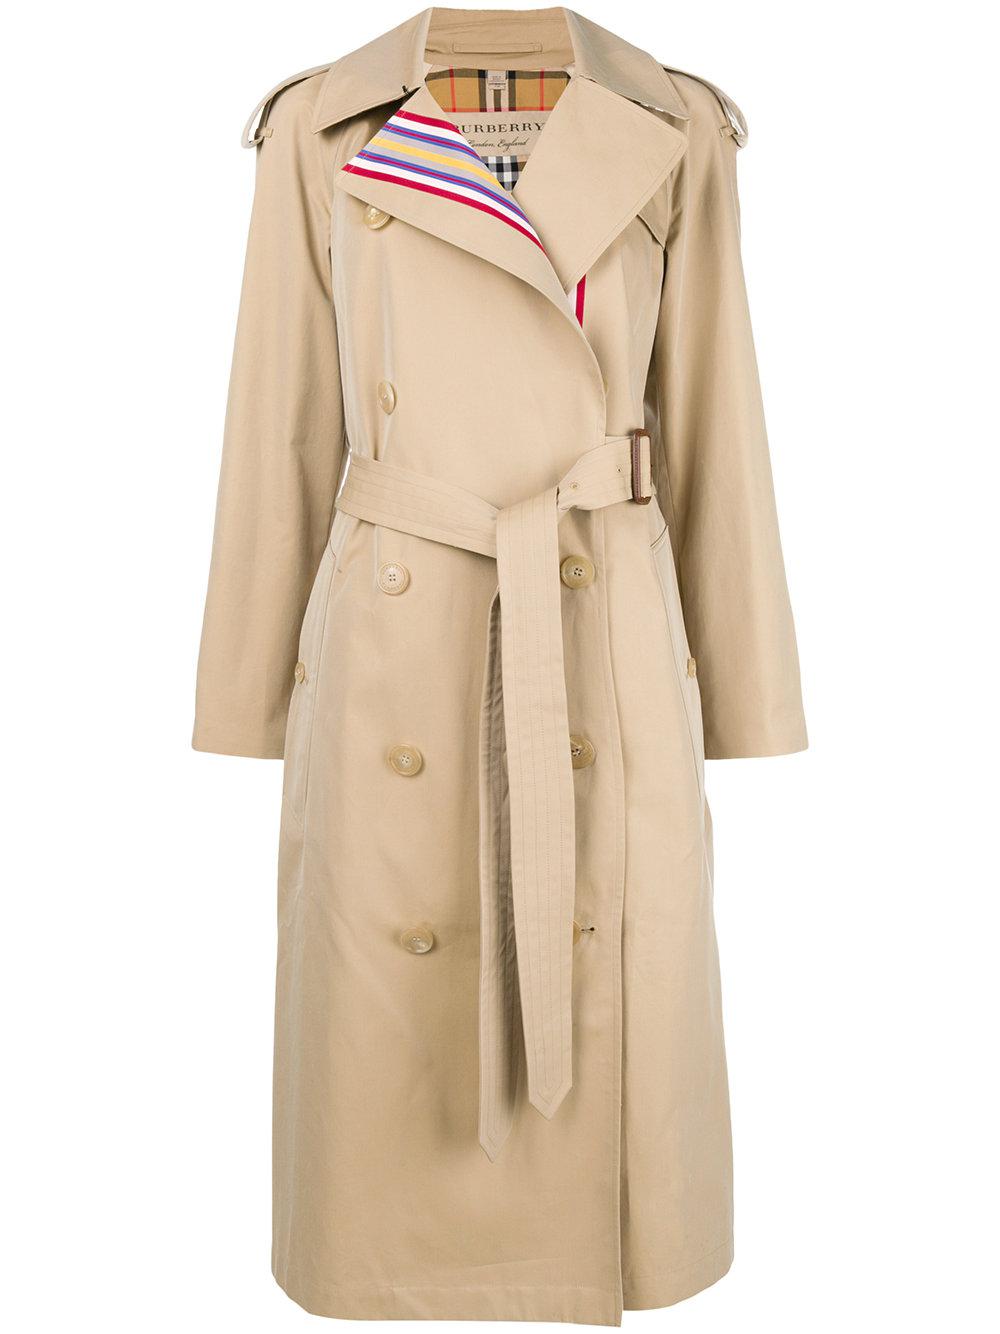 Burberry Cotton Bradfield Trench Coat in Beige (Natural) | Lyst